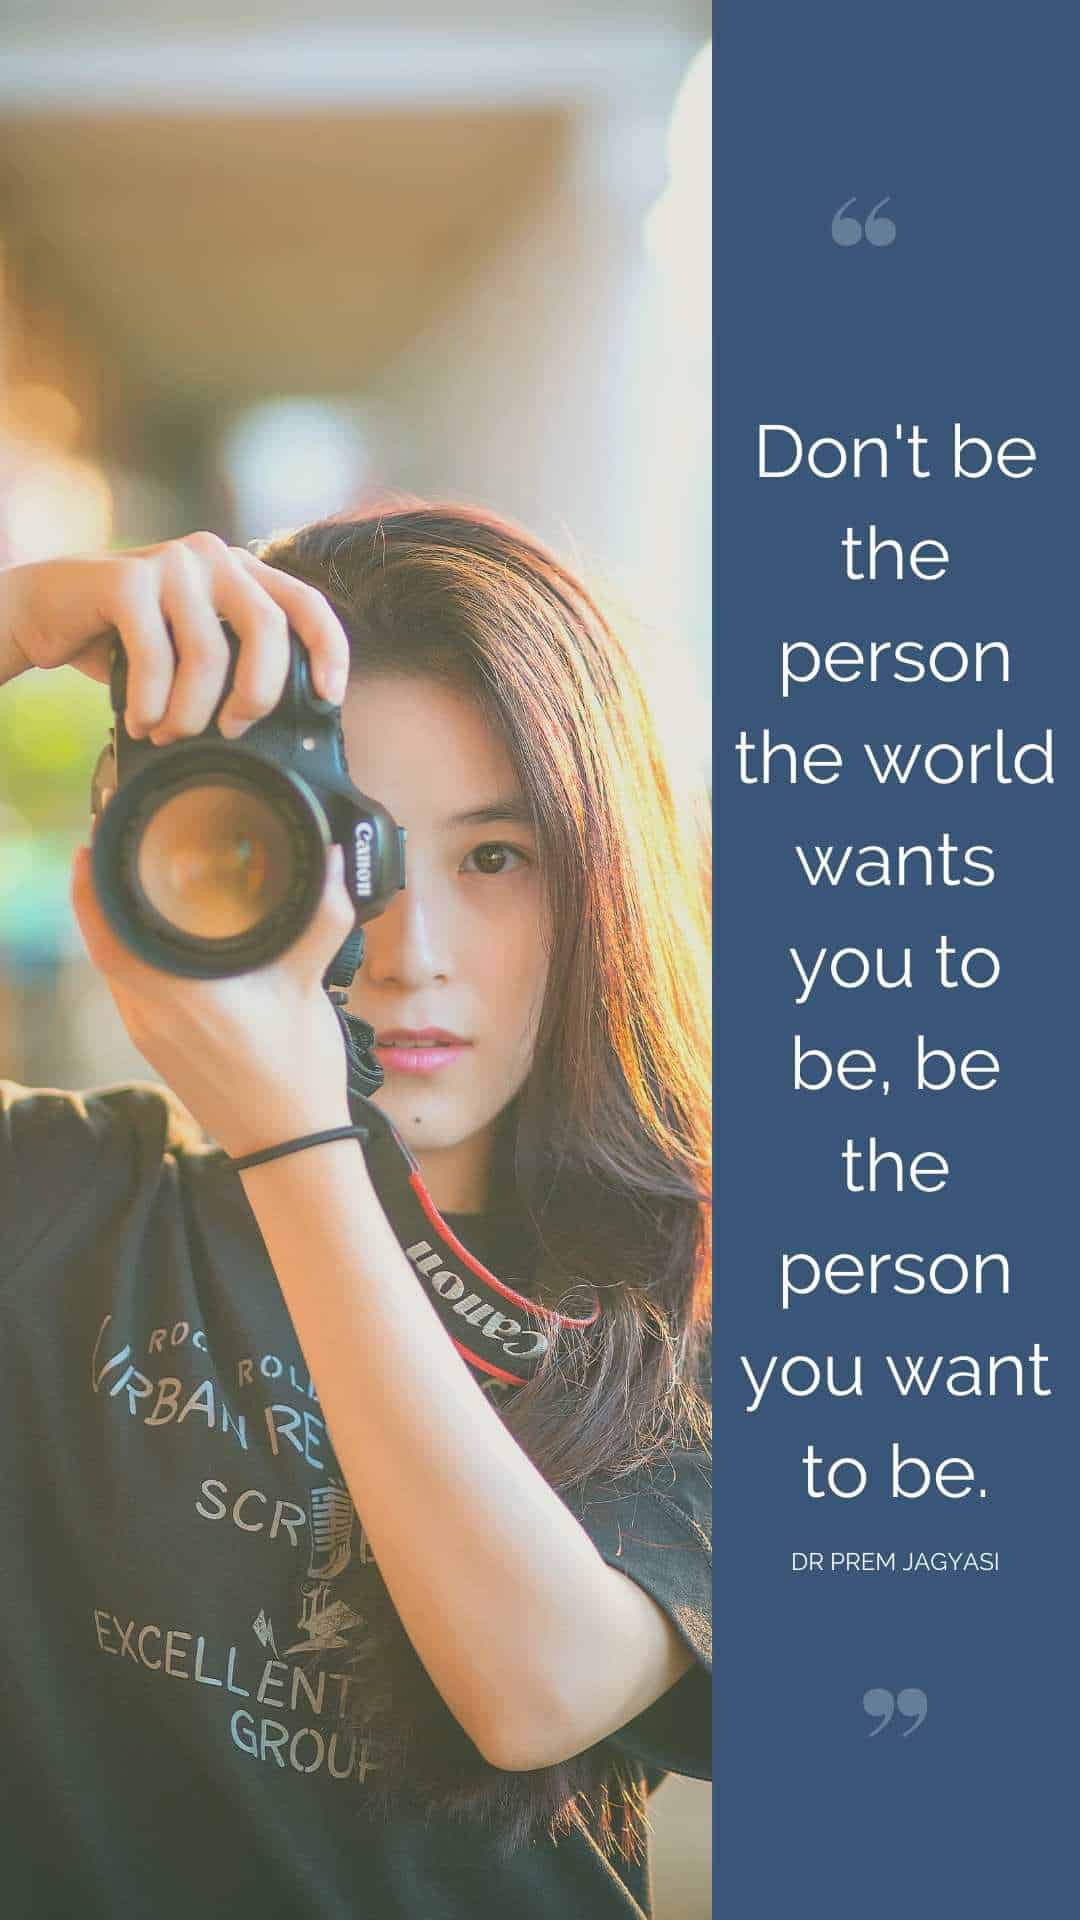 Don't be the person the world wants you to be, be the person you want to be.